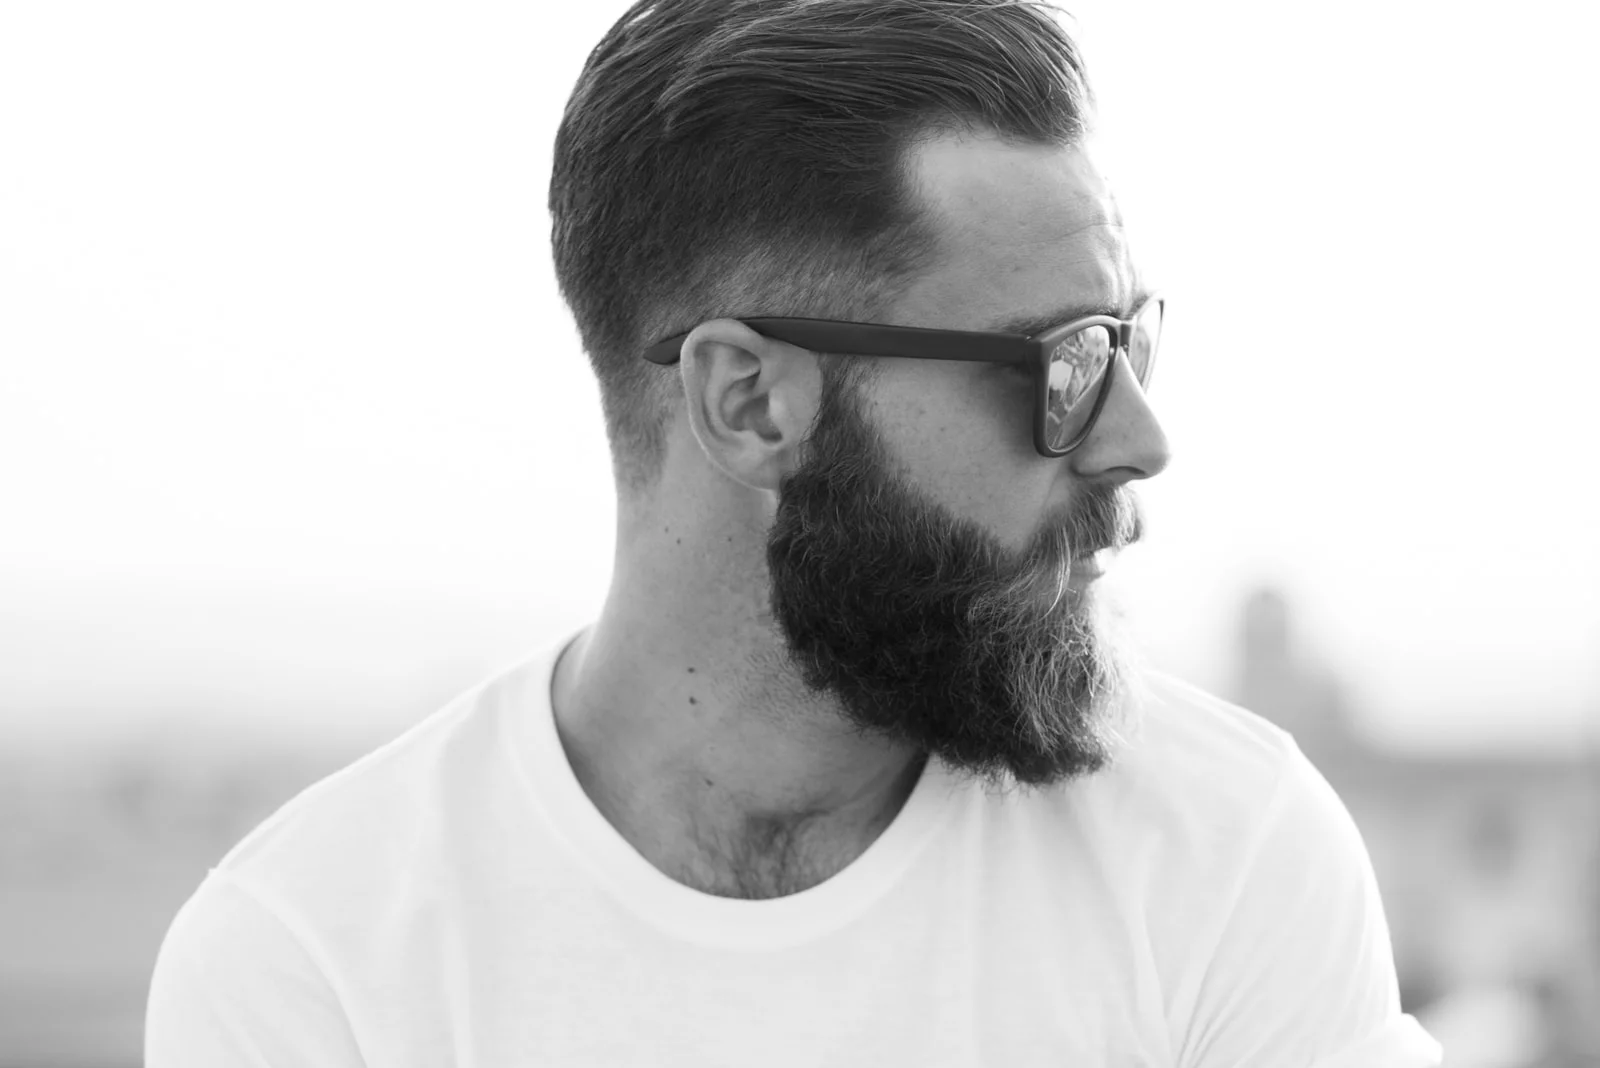 Bearded man posing in the street with sunglasses